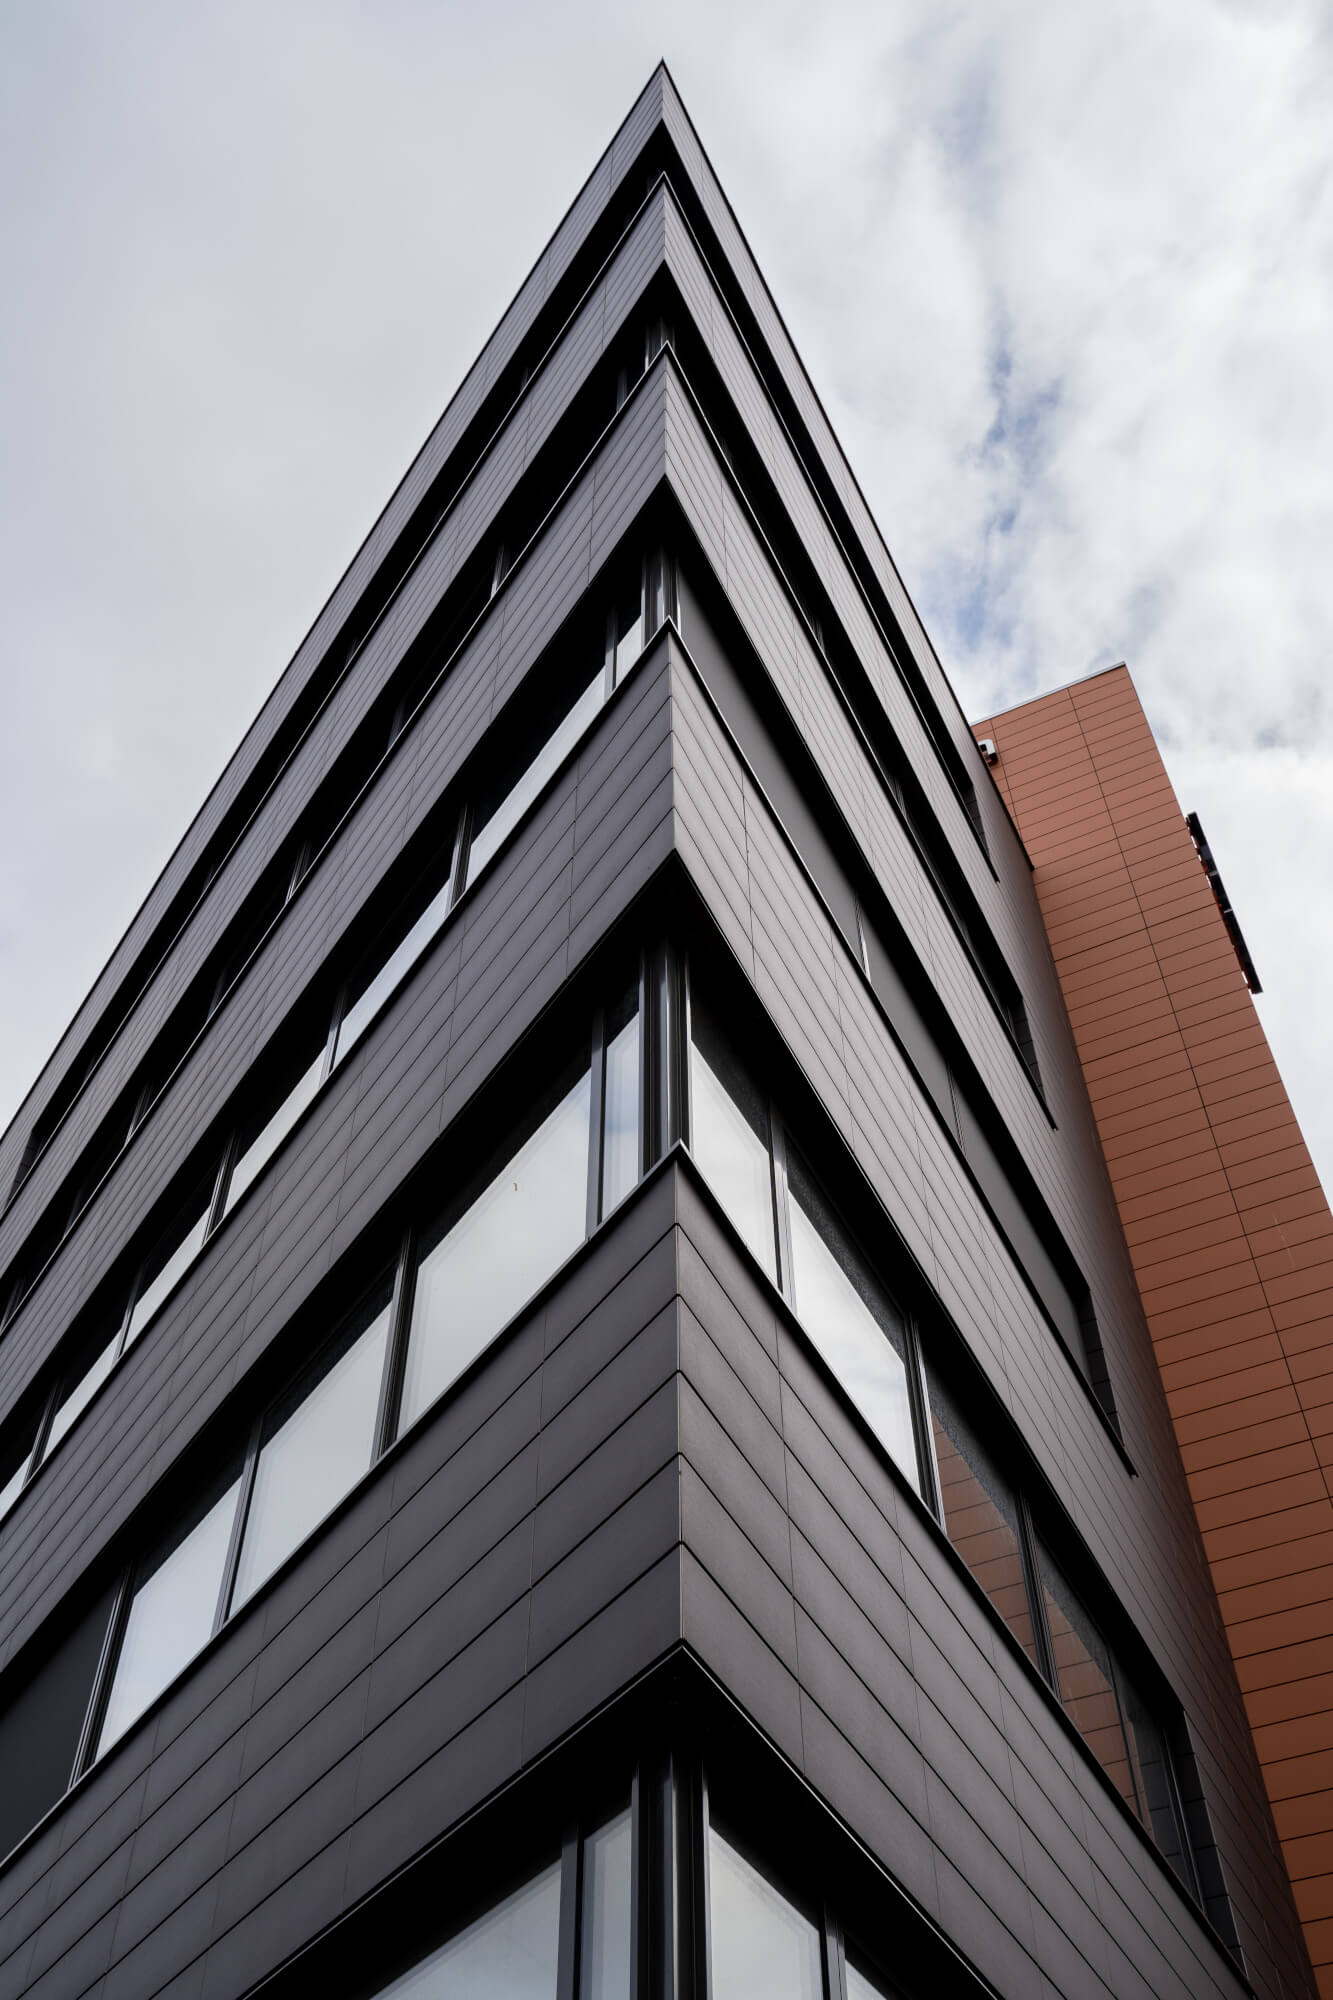 "Close-up view of the corner of the Tonality ceramic facade at the Human Total Care building in Eindhoven, designed by MH1 Architects for ESC Dronten, showcasing excellent craftsmanship and design